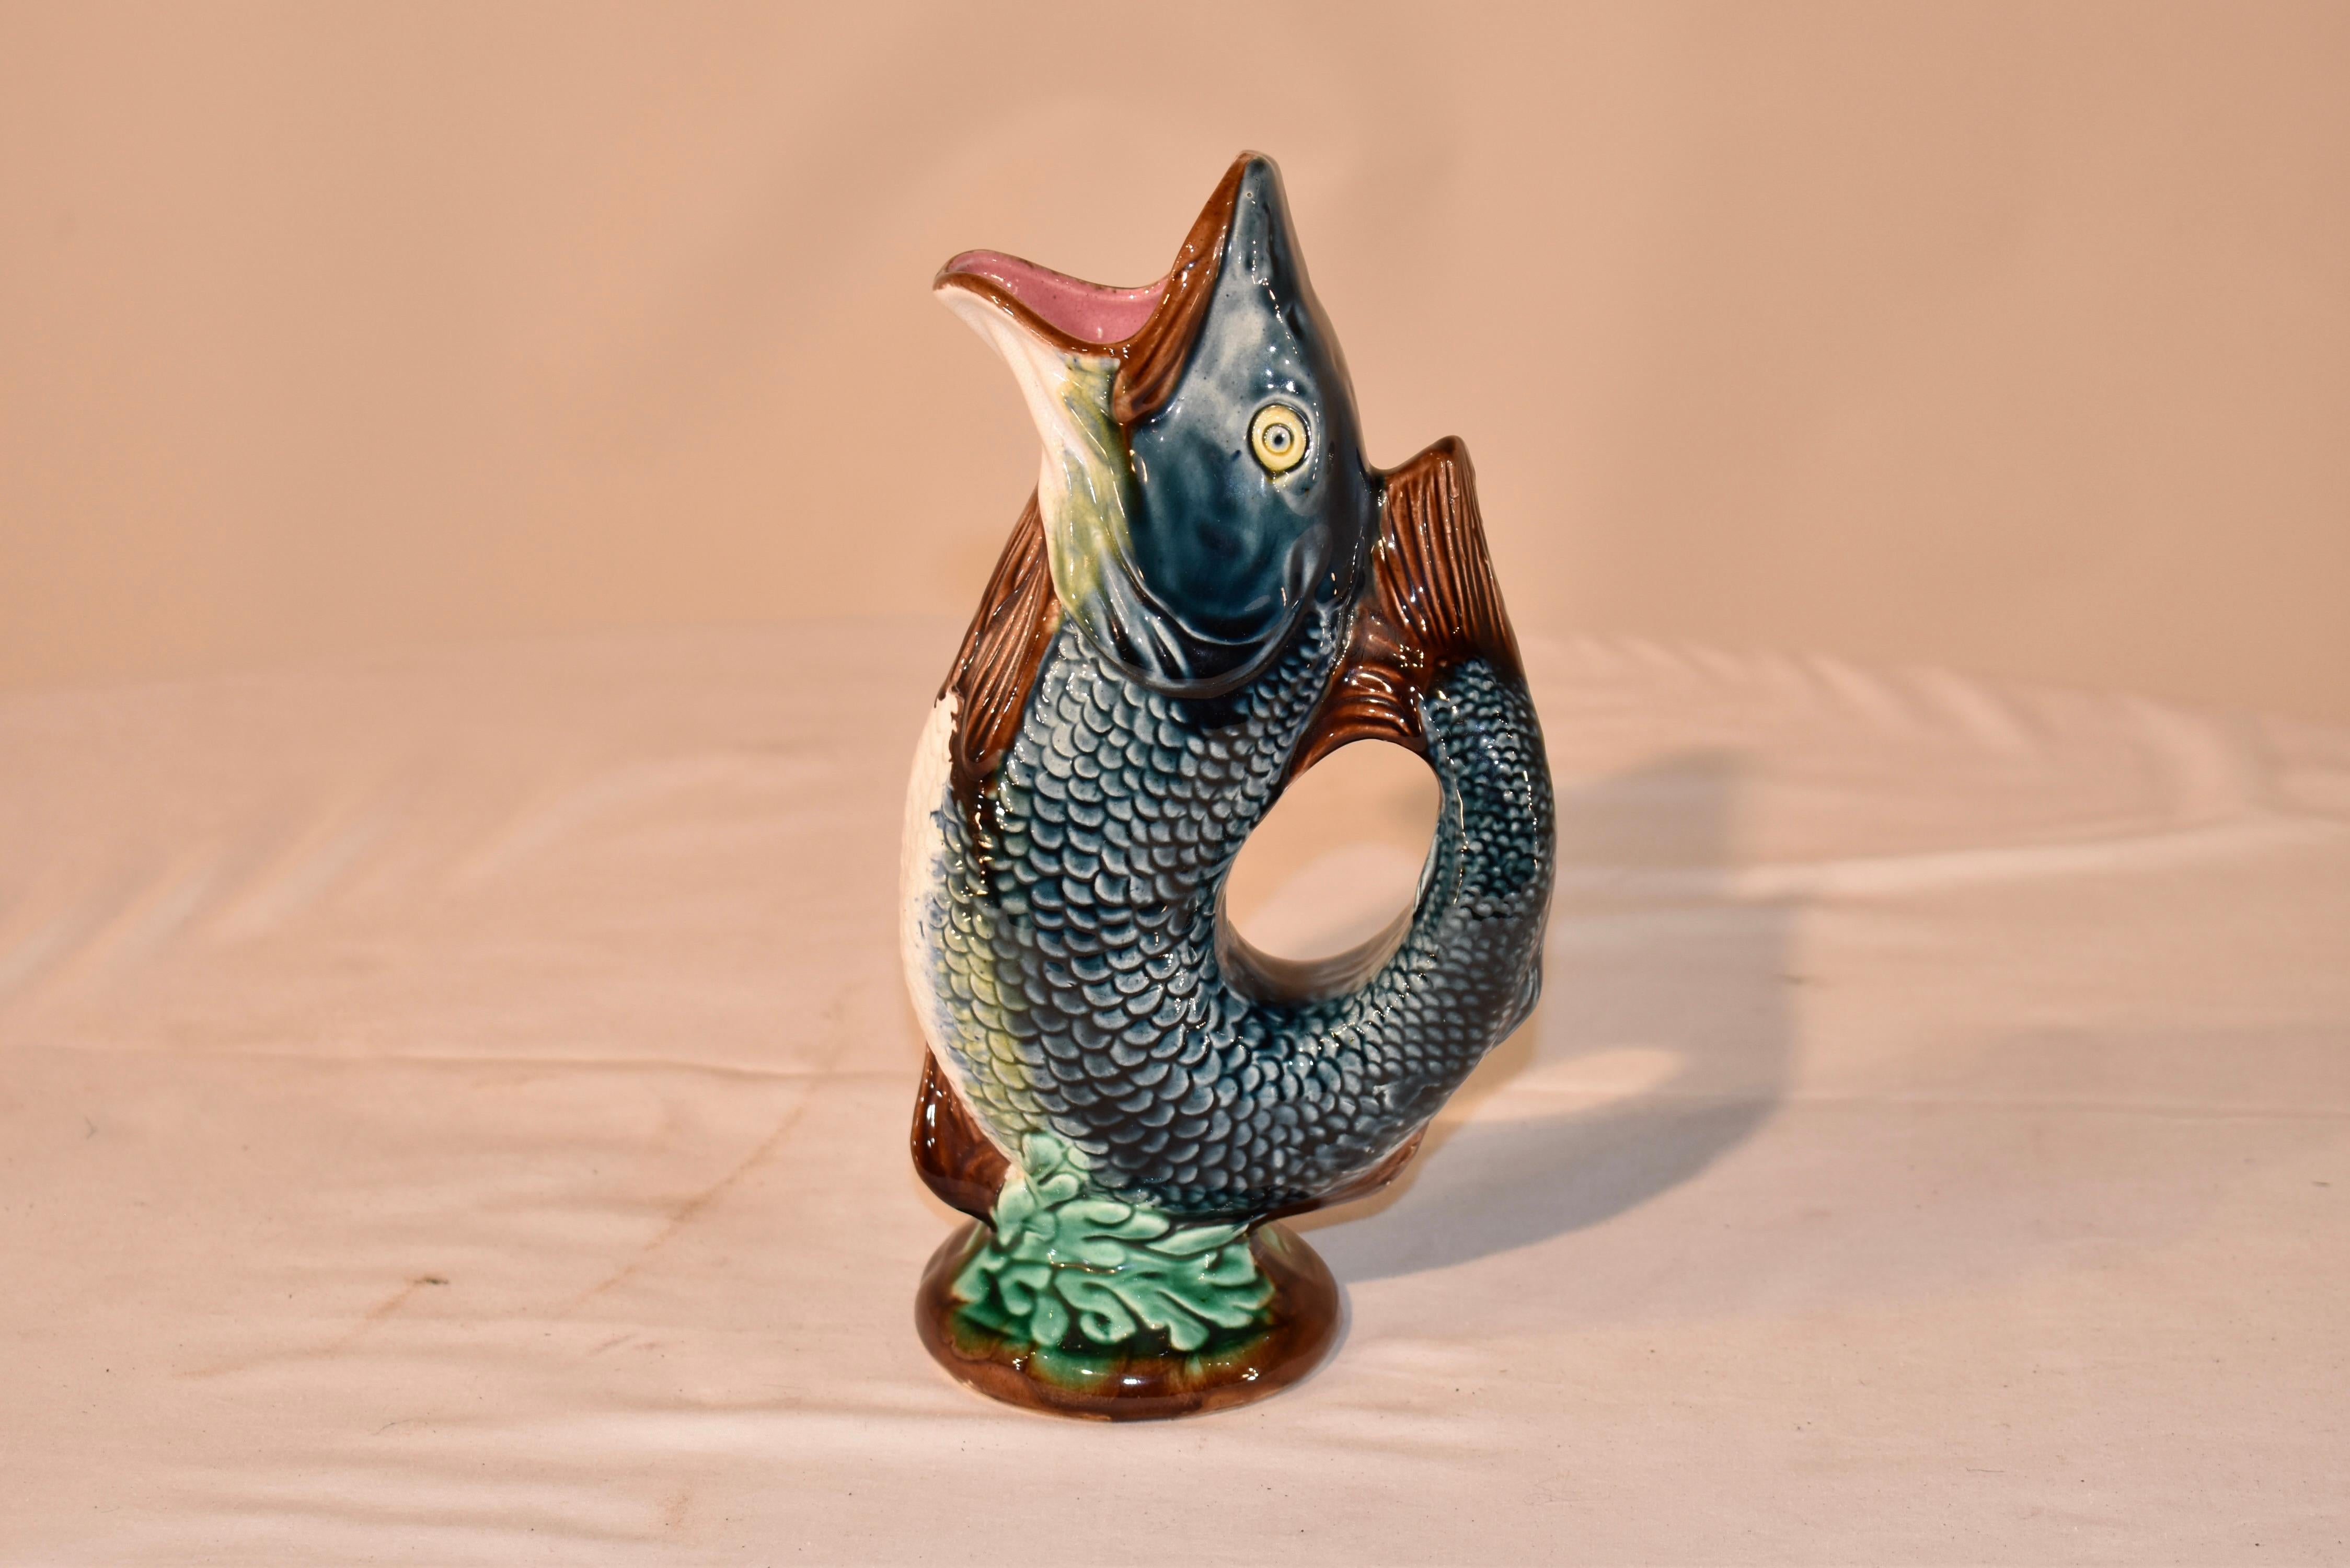 19th Century French majolica fish pitcher in lovely shades of blue, green, gray, brown and yellow. These are wonderfully whimsical pitchers that make a 